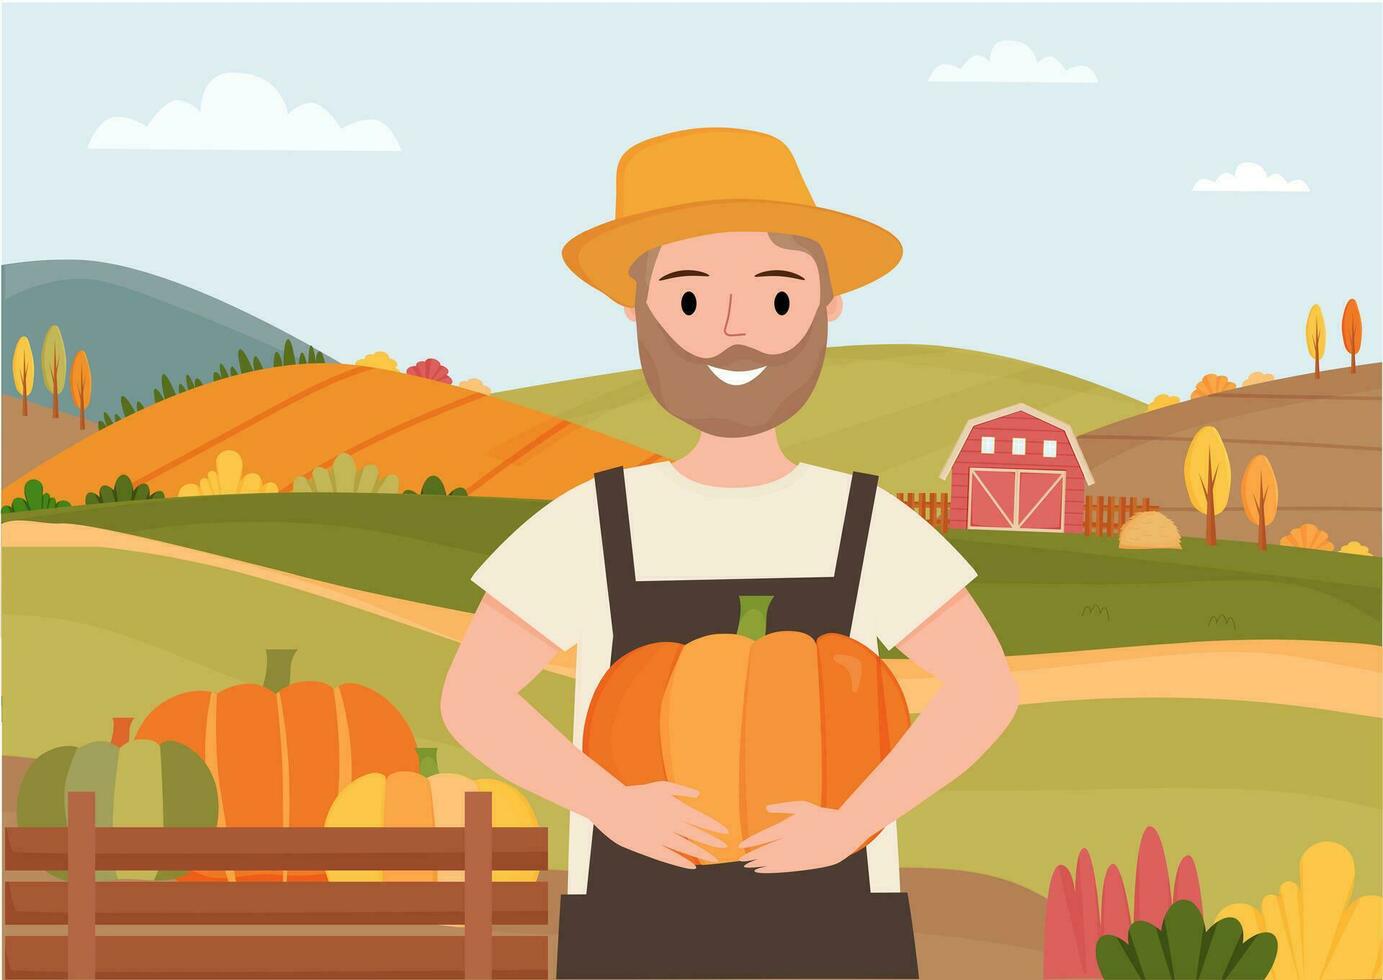 Farmer holds a big pumpkin in his hand on the countryside background. Harvest time. Farm market, harvest festival, eat local concept. Hello pumpking season. Organic vegetable. Vector illustration.